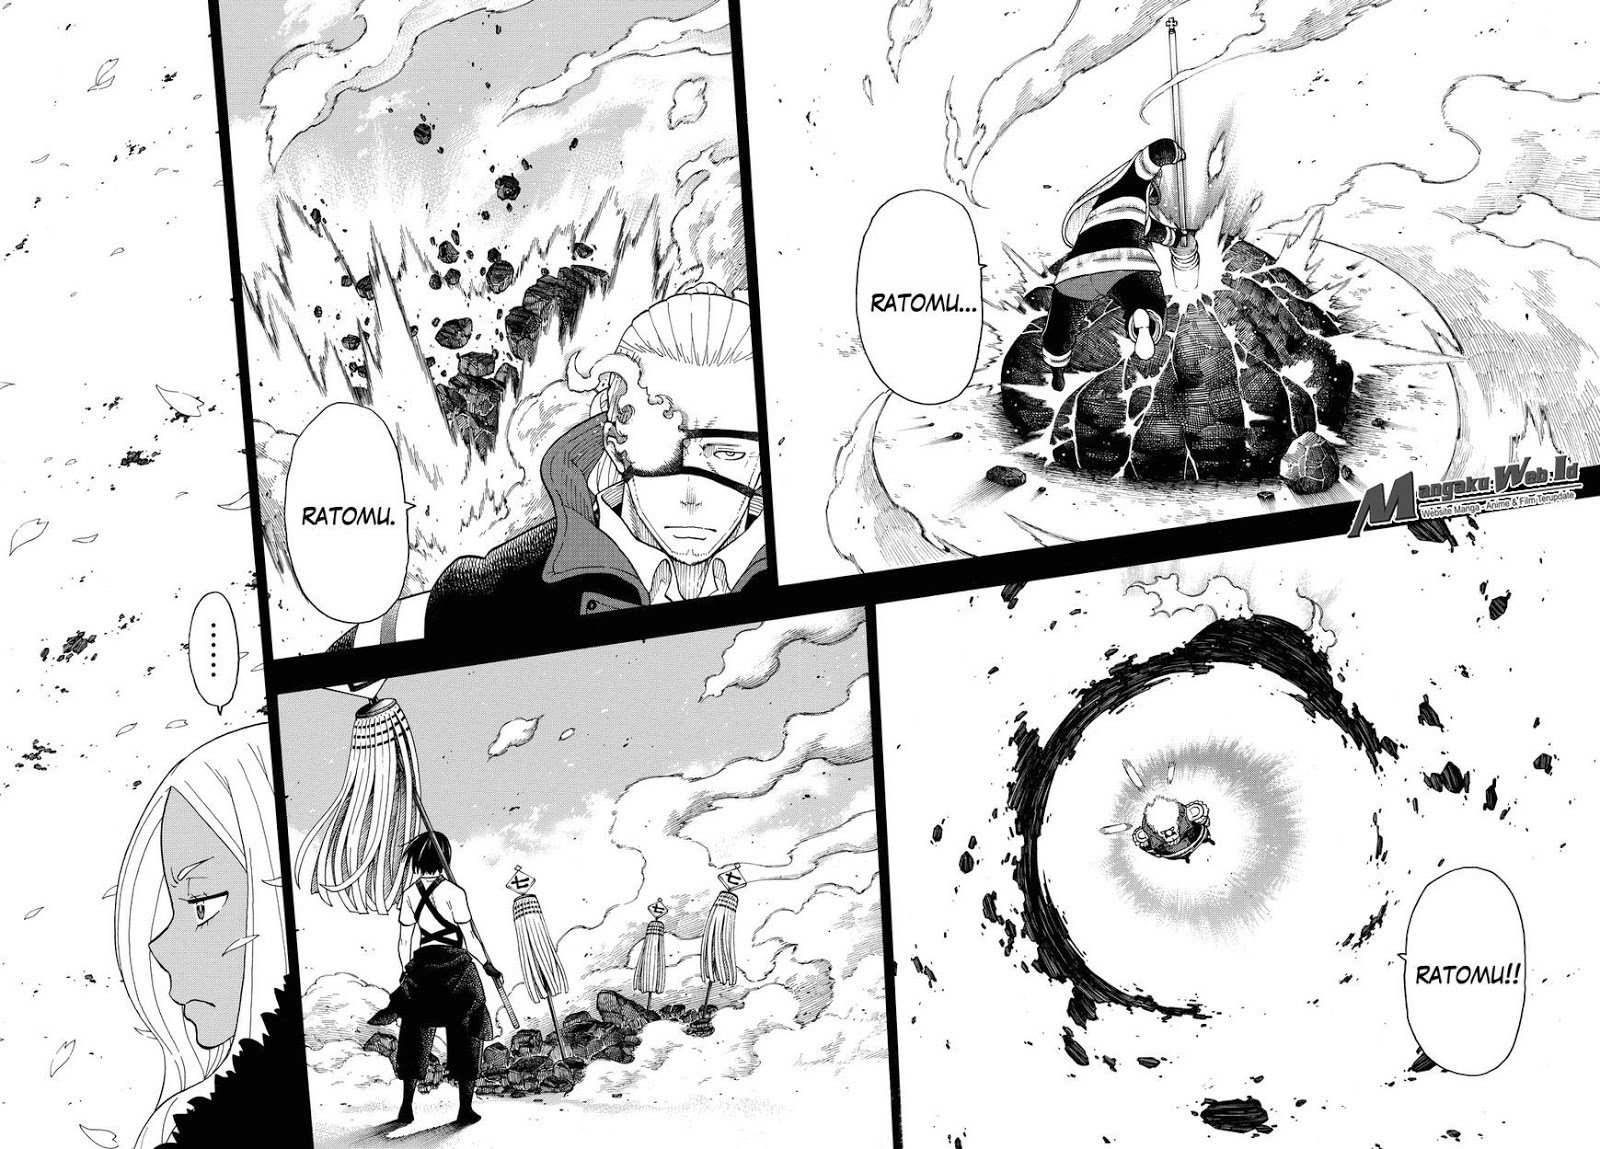 Fire Brigade of Flames Chapter 32